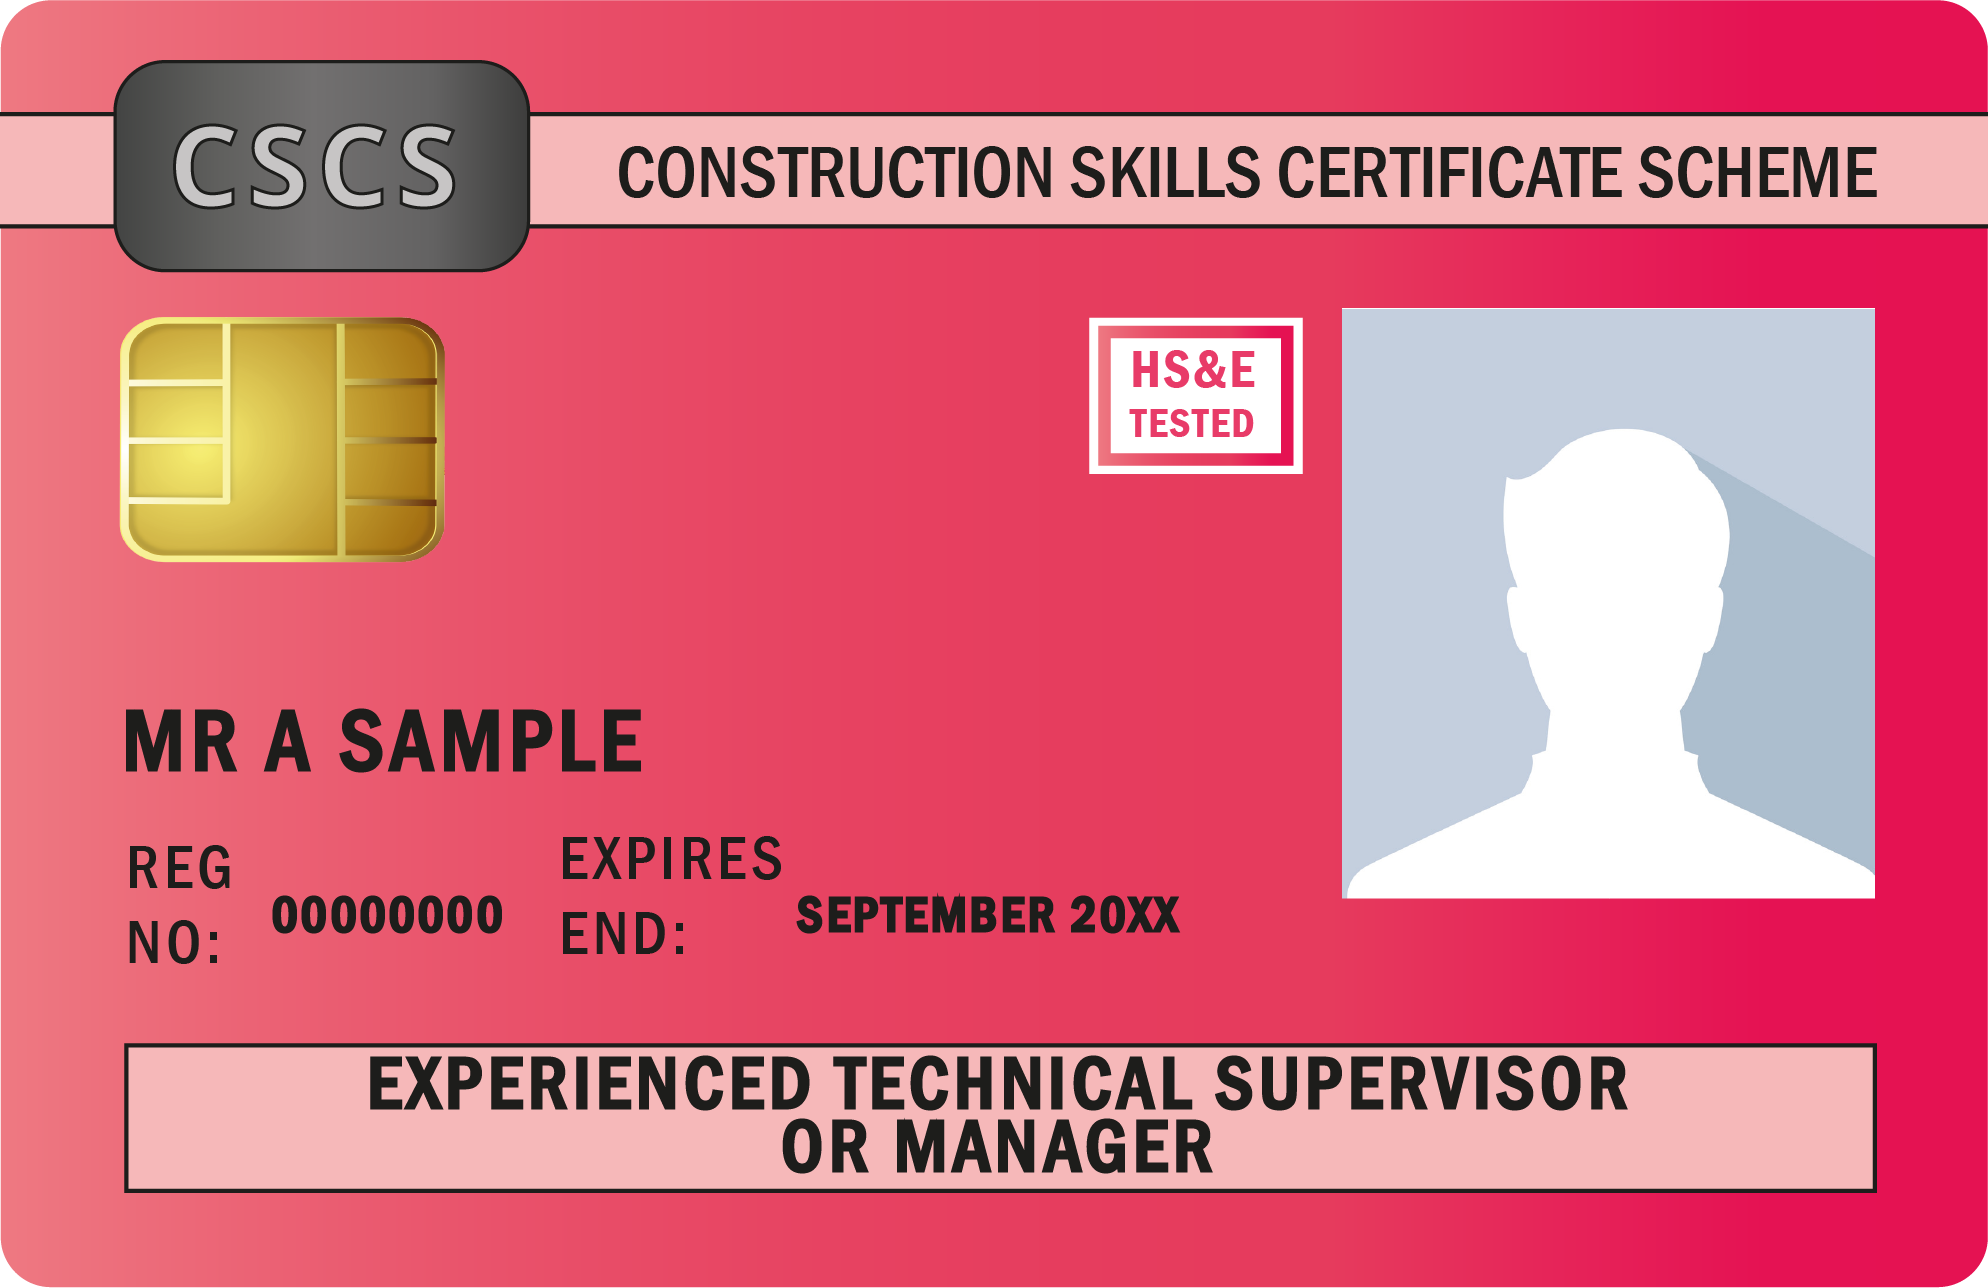 Image shows Experienced Technical Supervisor/Manager Red Card.